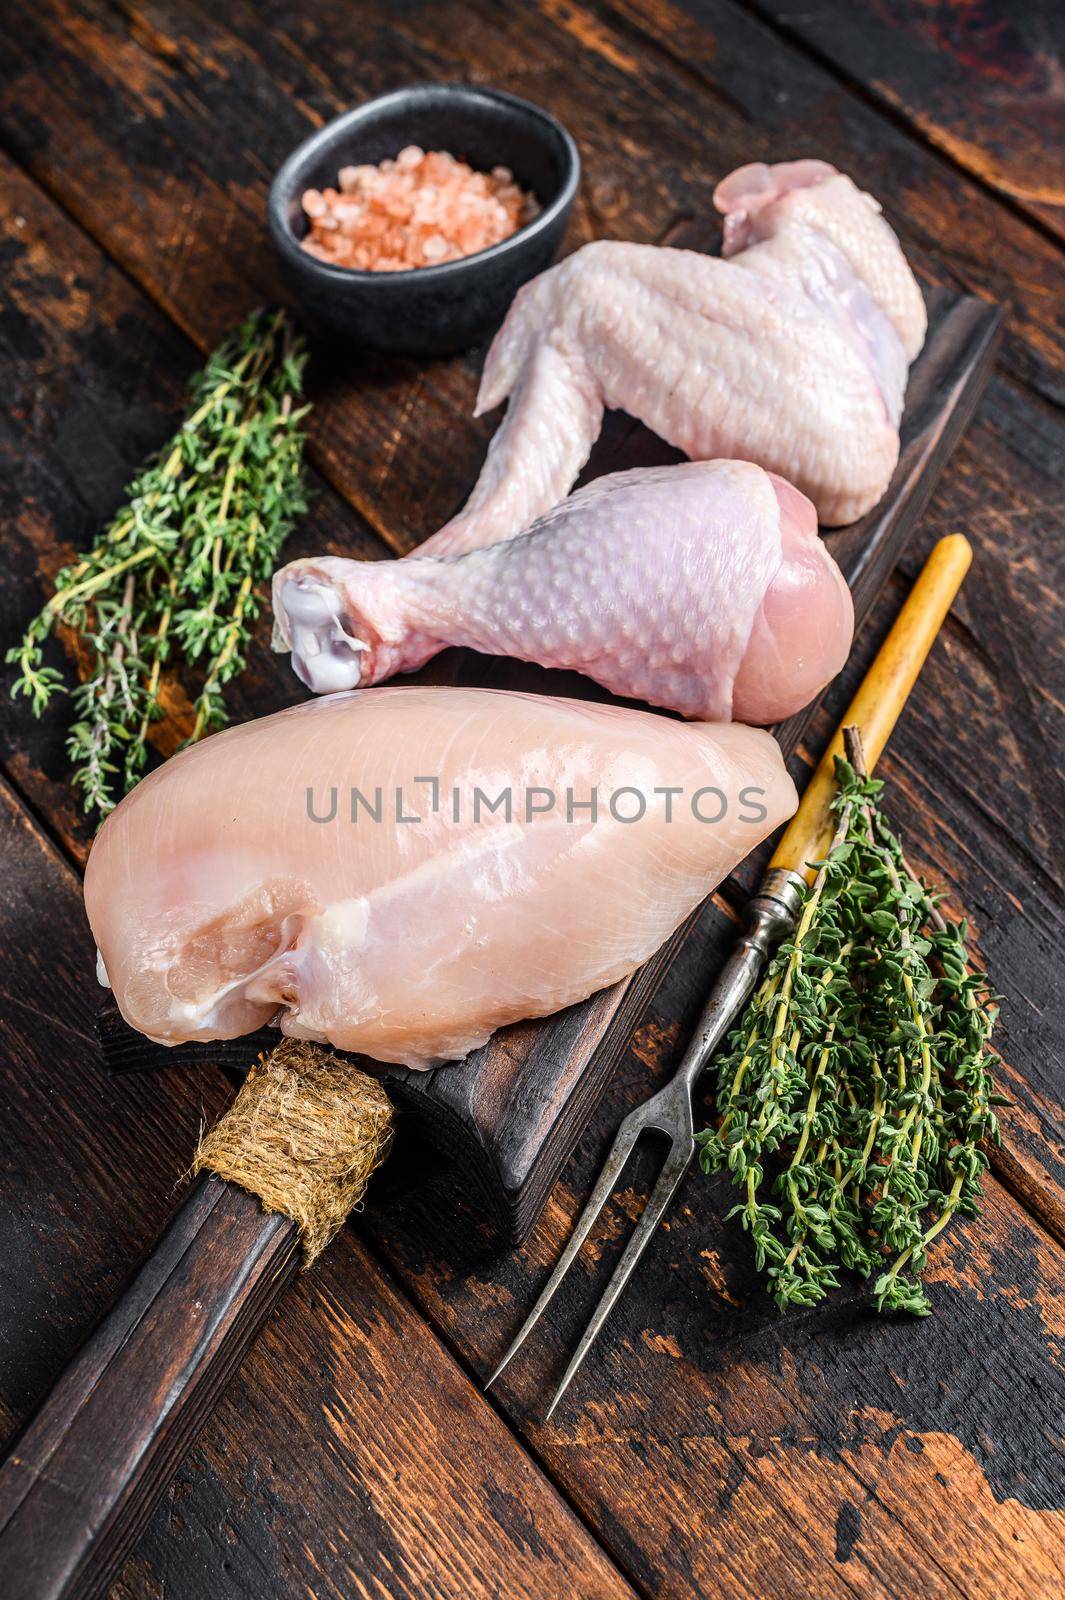 Raw chicken portions for cooking and barbecuing with skinless breasts, drumstick and wings. Dark wooden background. Top view.